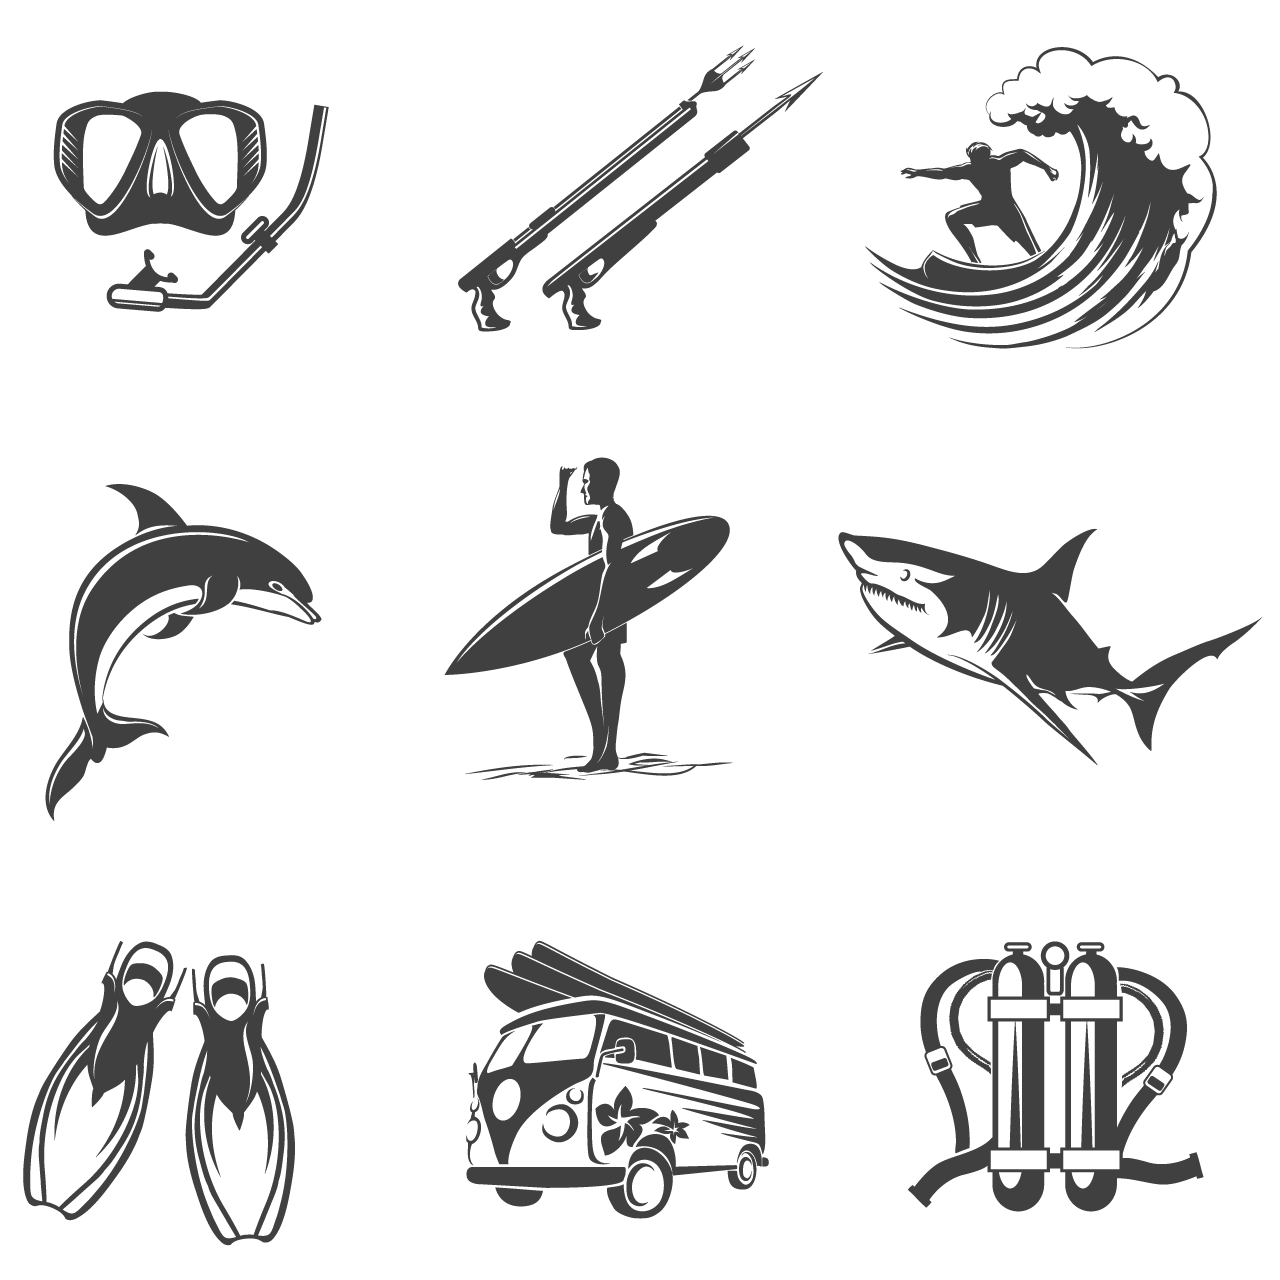 Beach icons black set summer vacation tourism signs leisure hunting dolphins sharks fins scuba spearfishing surfing diving